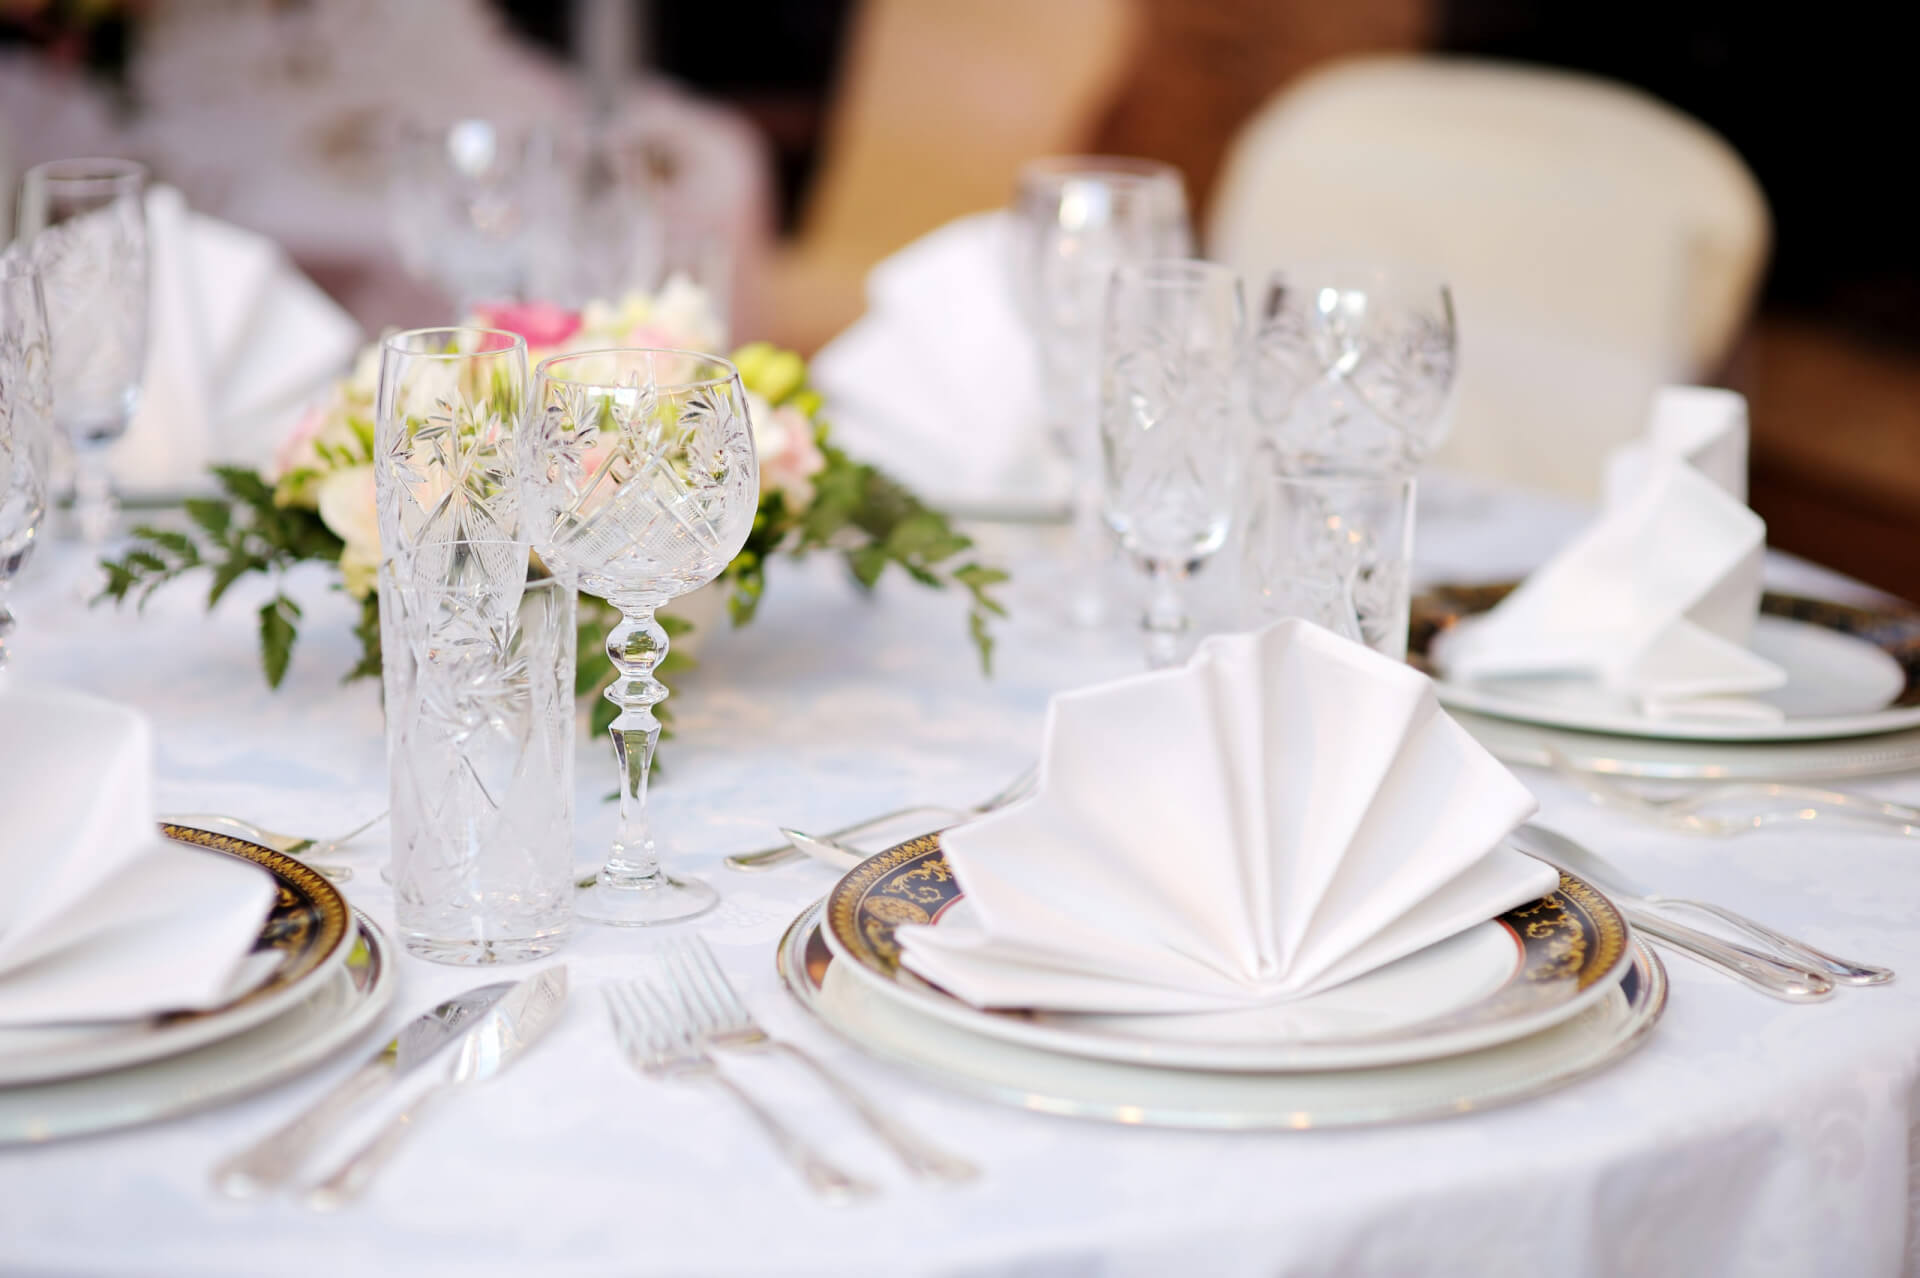 How to Properly Care for Your White Cloth Napkins?